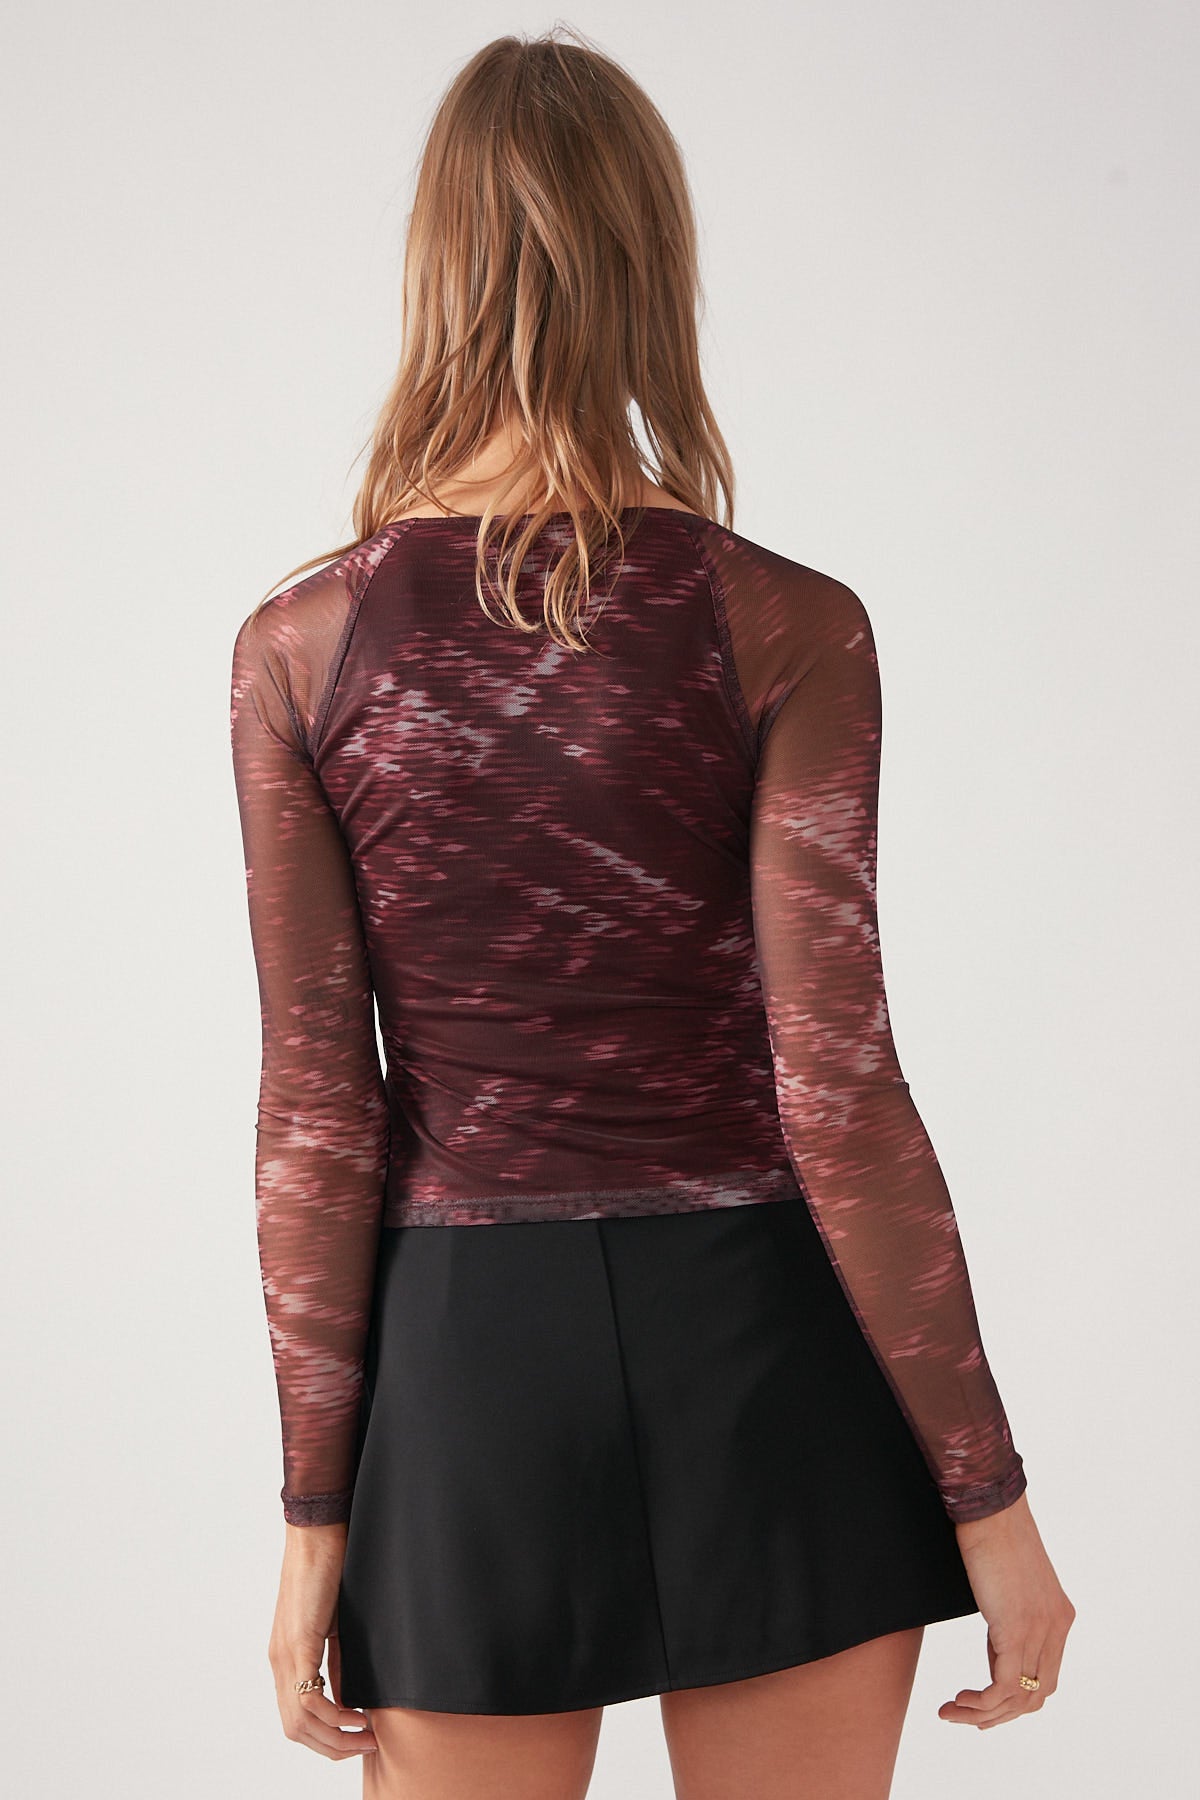 Perfect Stranger Wine Weave Long Sleeve Top Charcoal